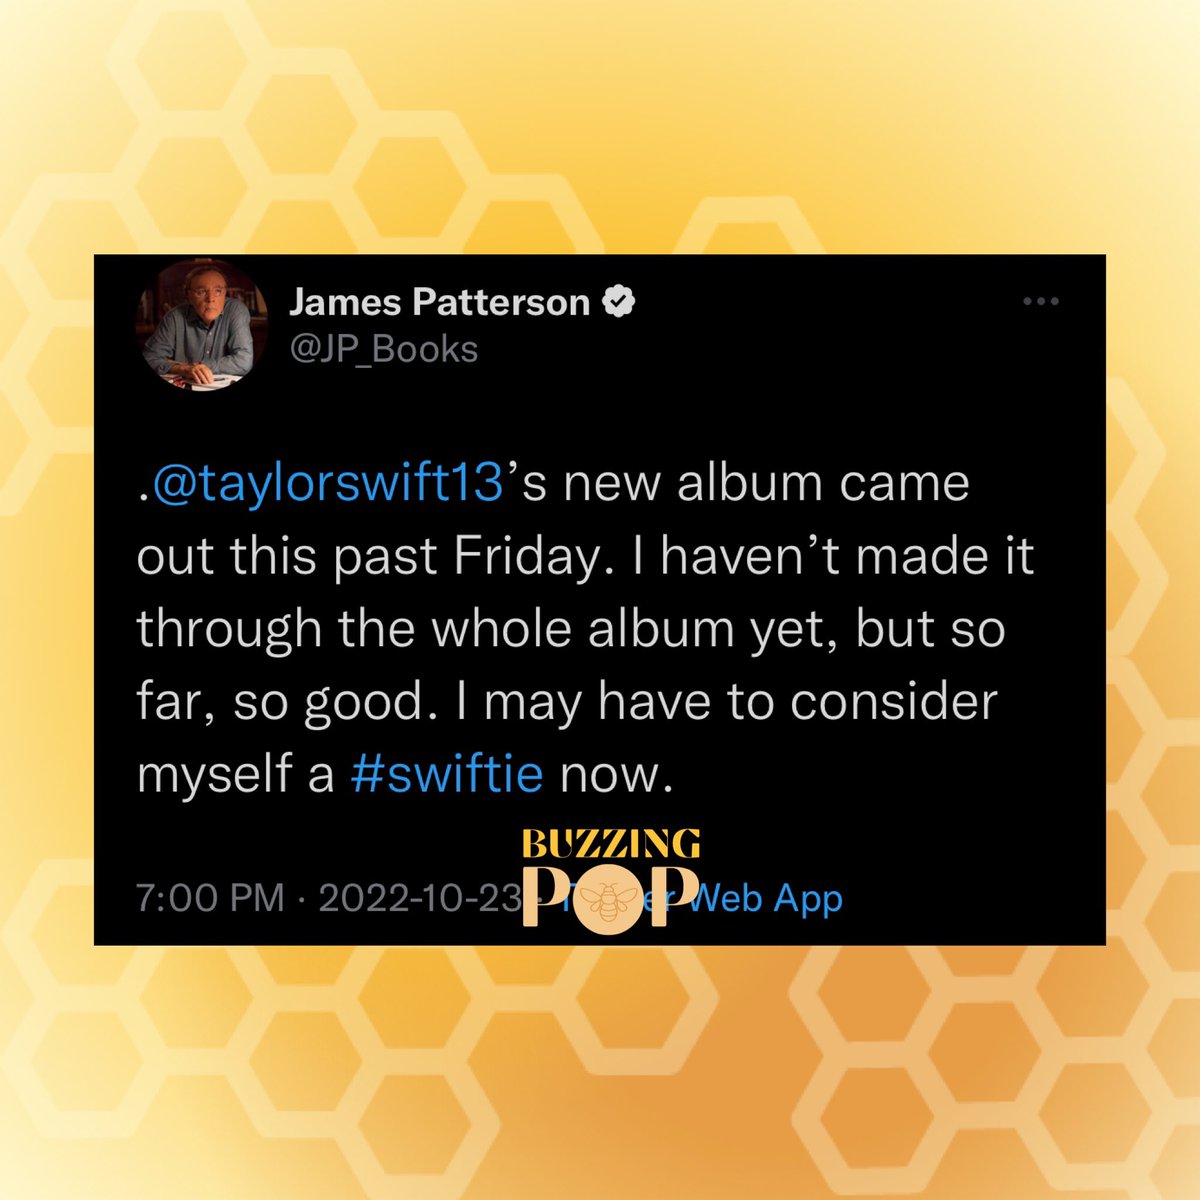 New York Times best-selling author, James Patterson, praises Taylor Swift’s new album, #Midnights: “I may have to consider myself a #swiftie now.”